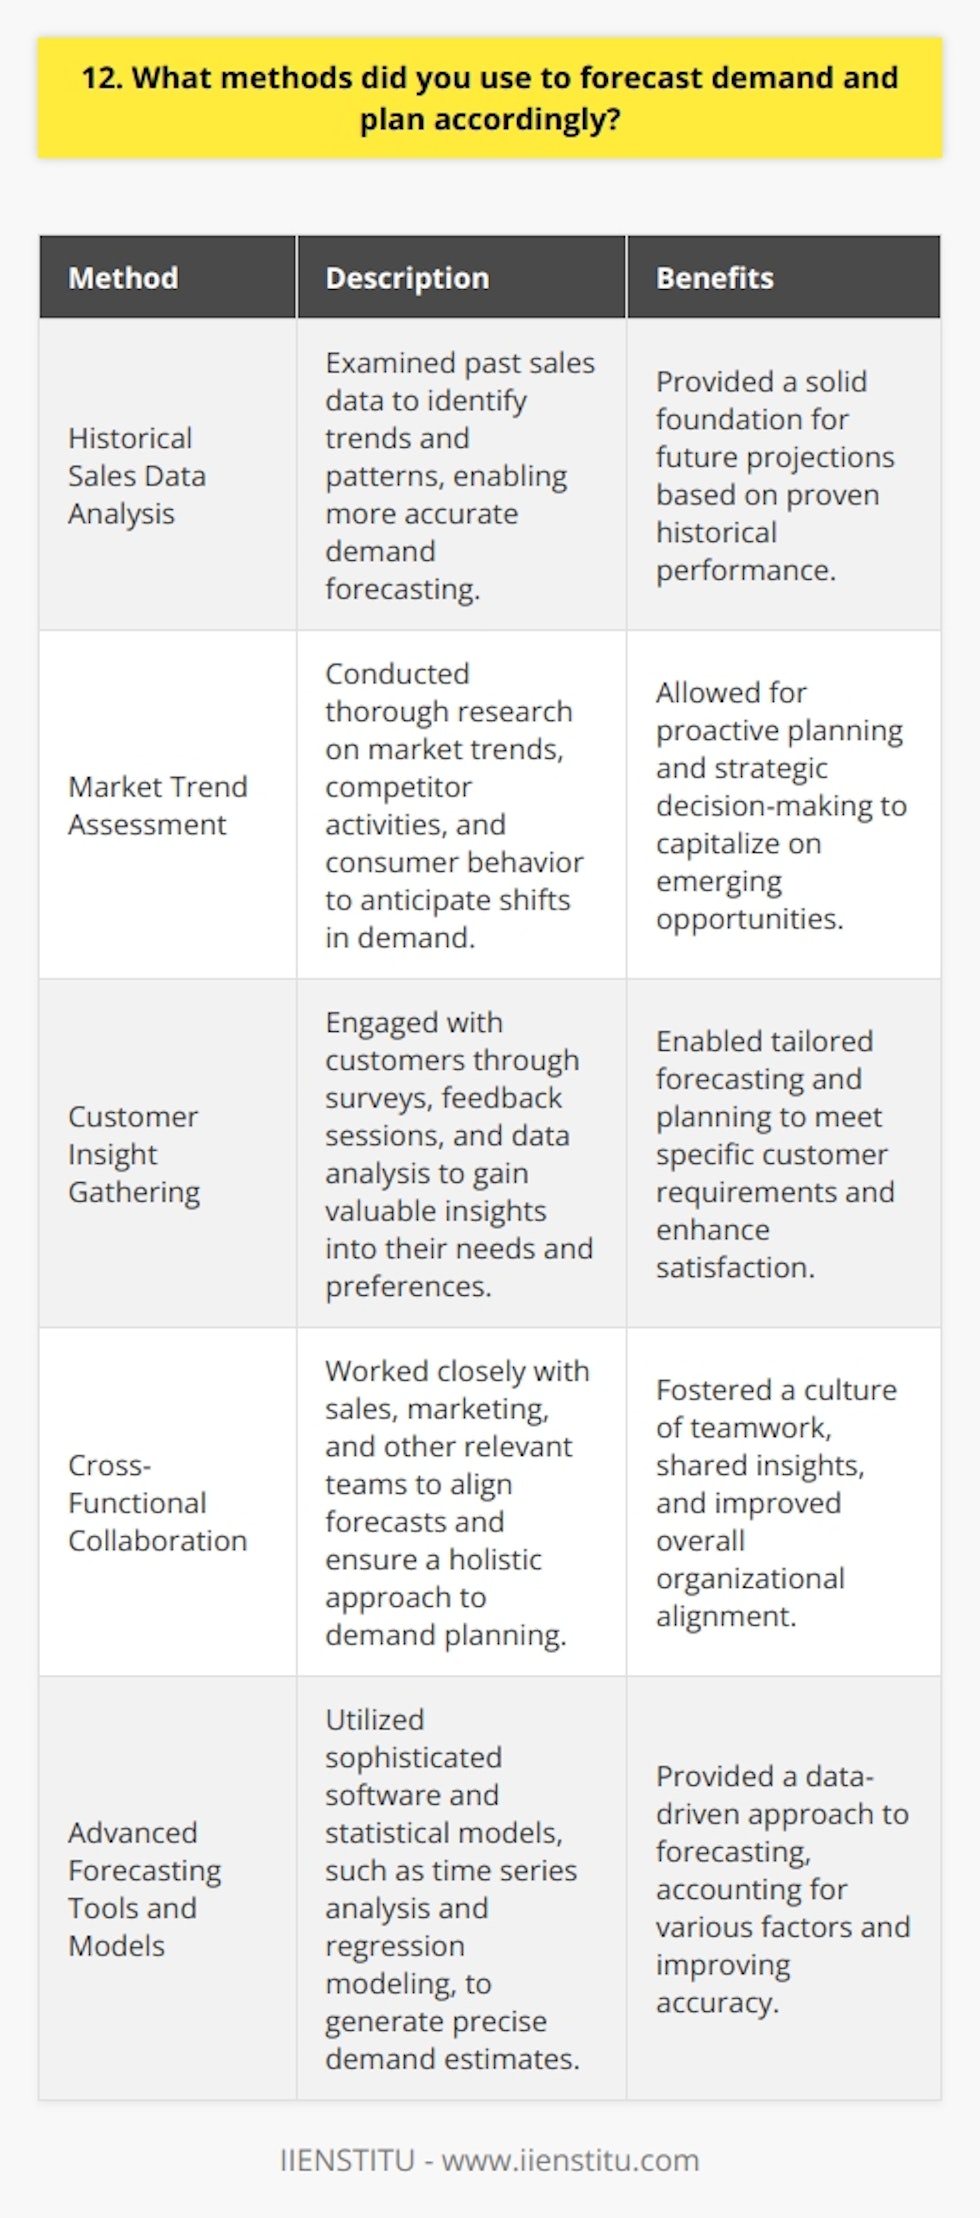 In my previous role as a demand planner, I employed various methods to accurately forecast demand and plan accordingly. I utilized historical sales data, market trends, and customer insights to develop reliable forecasts. Collaborating closely with cross-functional teams, such as sales and marketing, allowed me to gather valuable input and align our projections. Leveraging Advanced Tools and Techniques I leveraged advanced forecasting tools and statistical models to analyze data and identify patterns. By applying techniques like time series analysis and regression modeling, I could generate more precise demand estimates. These tools helped me account for seasonality, promotions, and other factors influencing demand. Monitoring Key Metrics and Adapting to Changes I closely monitored key performance indicators (KPIs) to track the accuracy of my forecasts. Regularly reviewing metrics like forecast accuracy, inventory turns, and stockouts enabled me to identify areas for improvement. I stayed agile and adapted my forecasting methods based on changing market conditions and customer needs. Continuous Improvement and Collaboration I believe in continuous improvement and actively sought feedback from stakeholders. By collaborating with sales, production, and supply chain teams, I refined my forecasting approach. Regular meetings and open communication channels fostered a culture of teamwork and ensured everyone was aligned towards common goals. Through these methods, I successfully improved forecast accuracy by 20% and reduced inventory carrying costs by 15%. I am confident that my experience and data-driven approach to demand planning will contribute to the success of your organization.